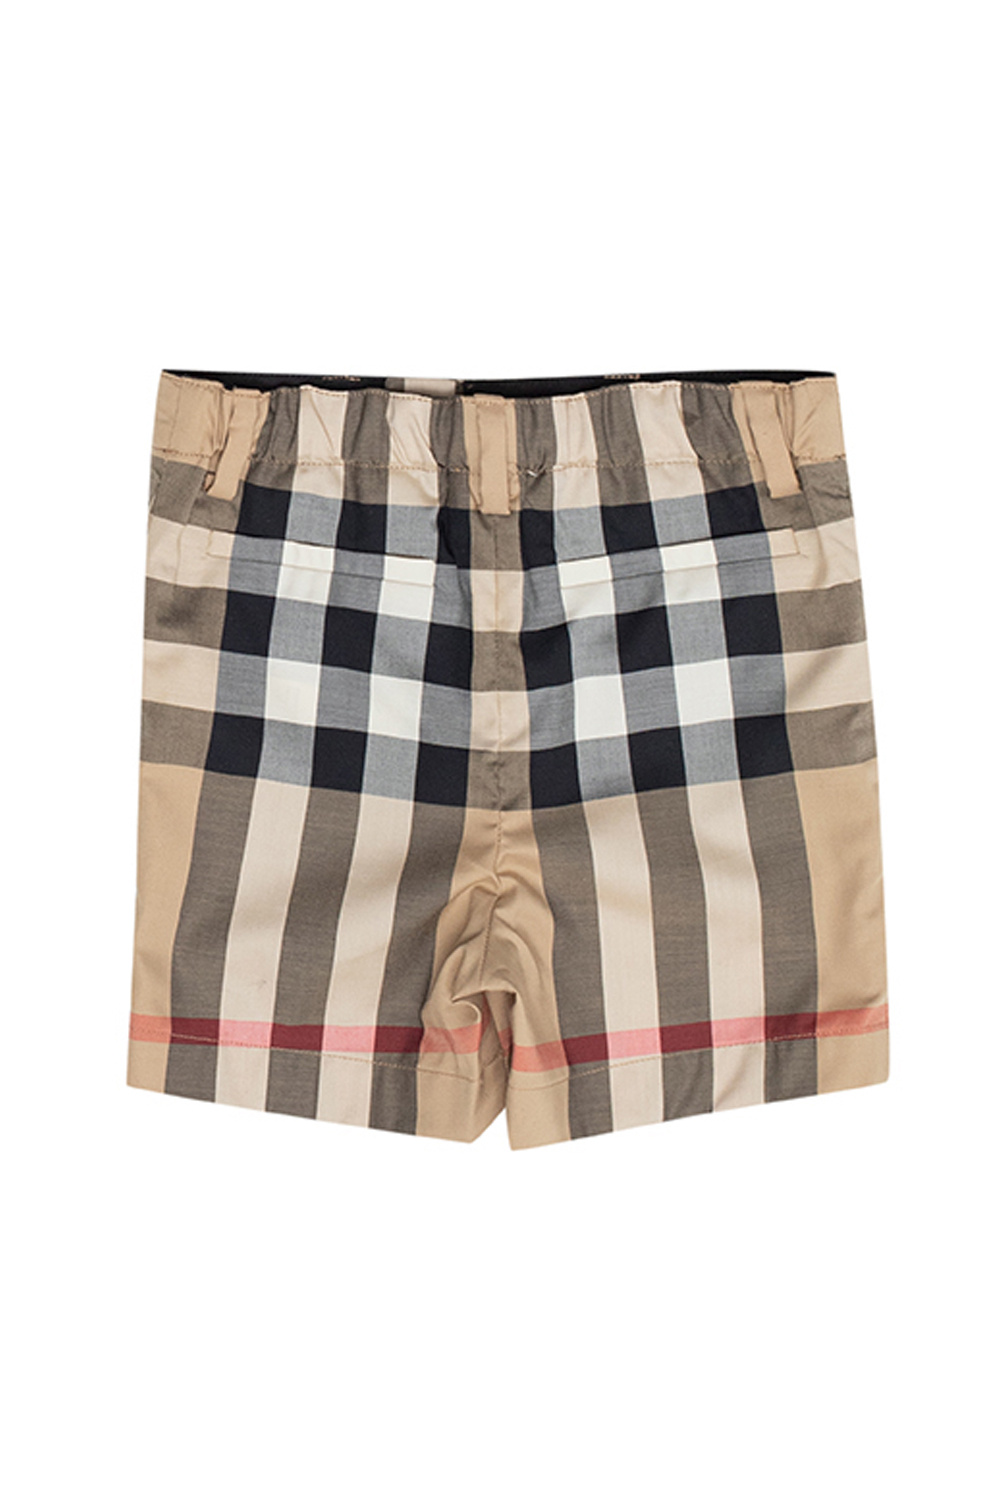 Burberry Kids Checked shorts